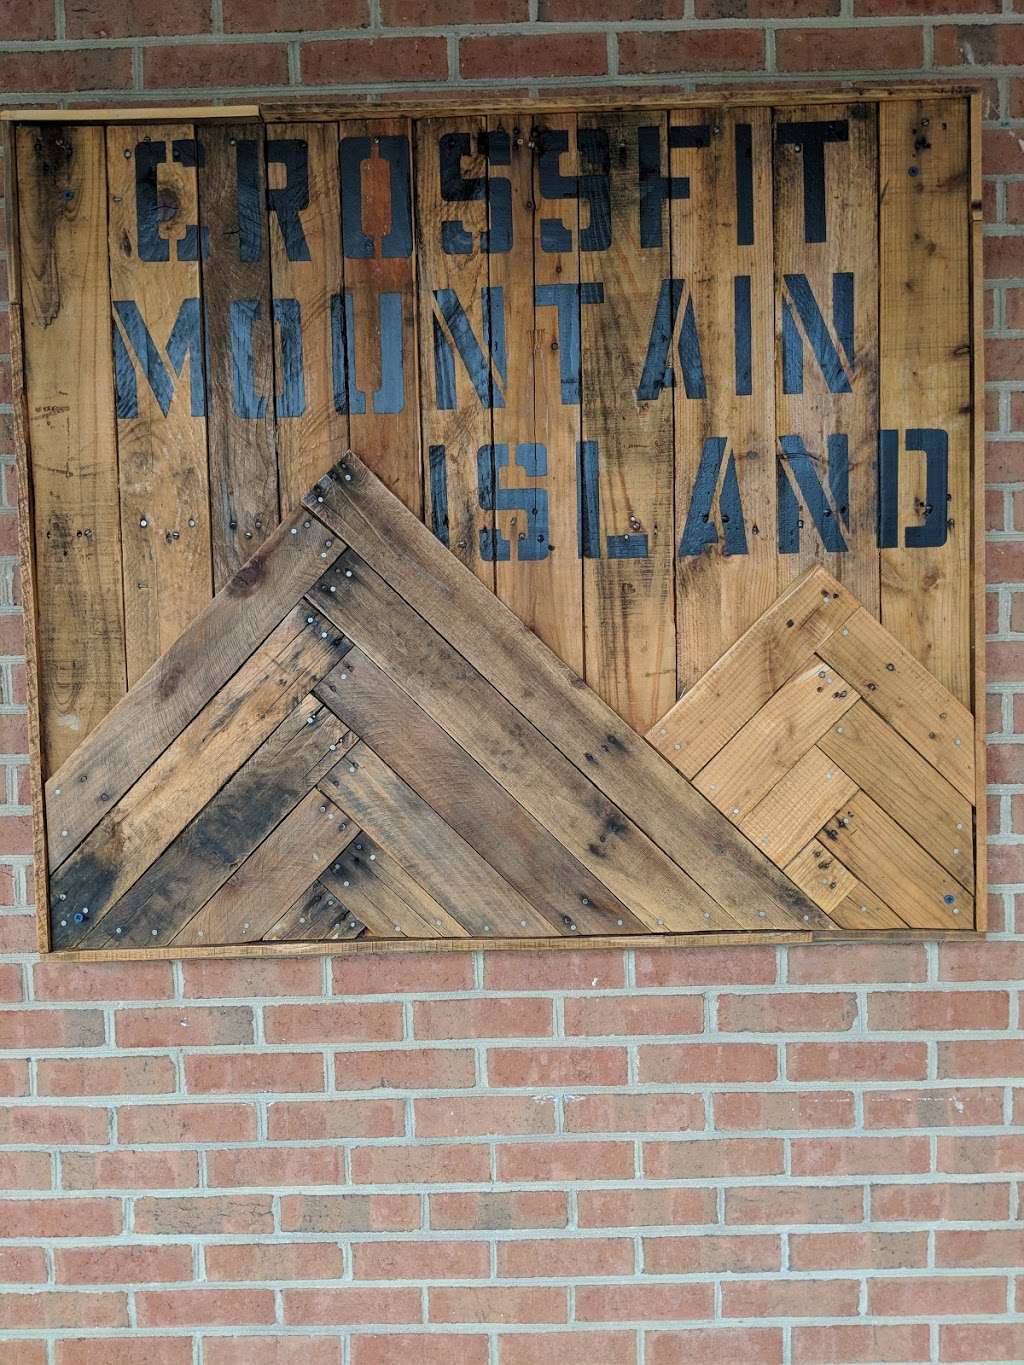 CrossFit Mountain Island | 8416 Bellhaven Blvd, Charlotte, NC 28216, USA | Phone: (803) 242-4816